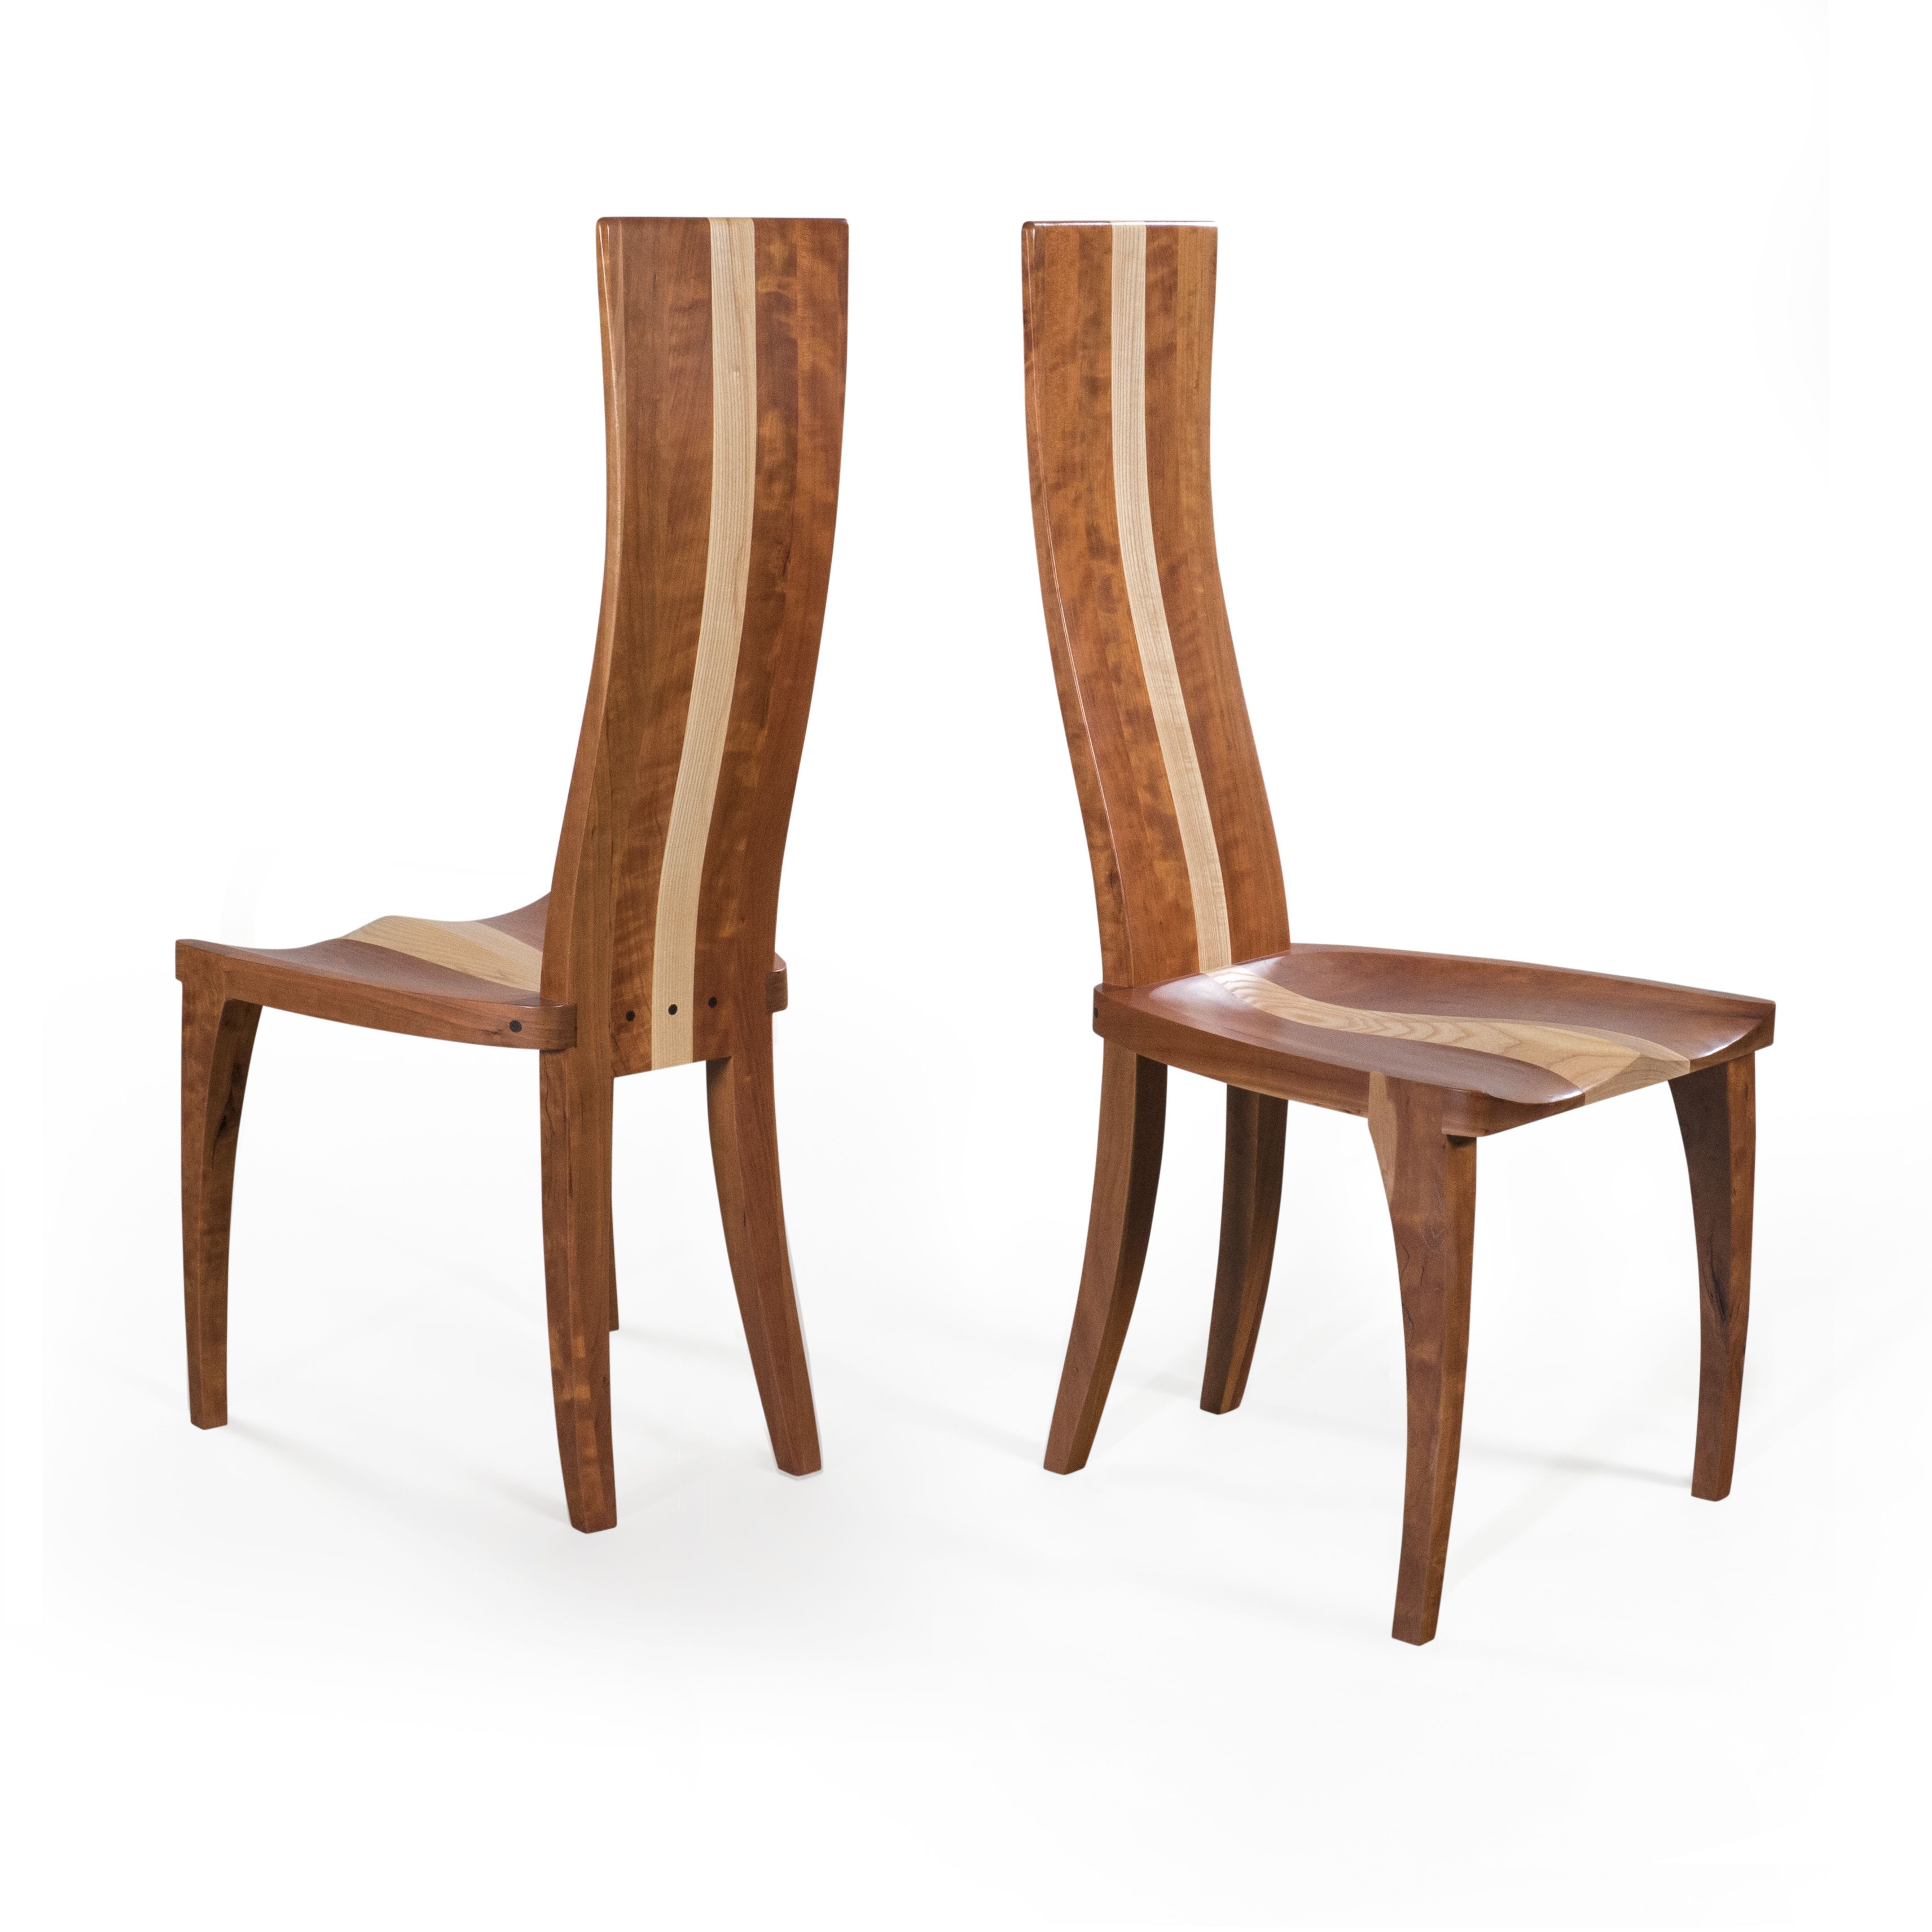 Durable Wooden Dining Chairs For Restaurants